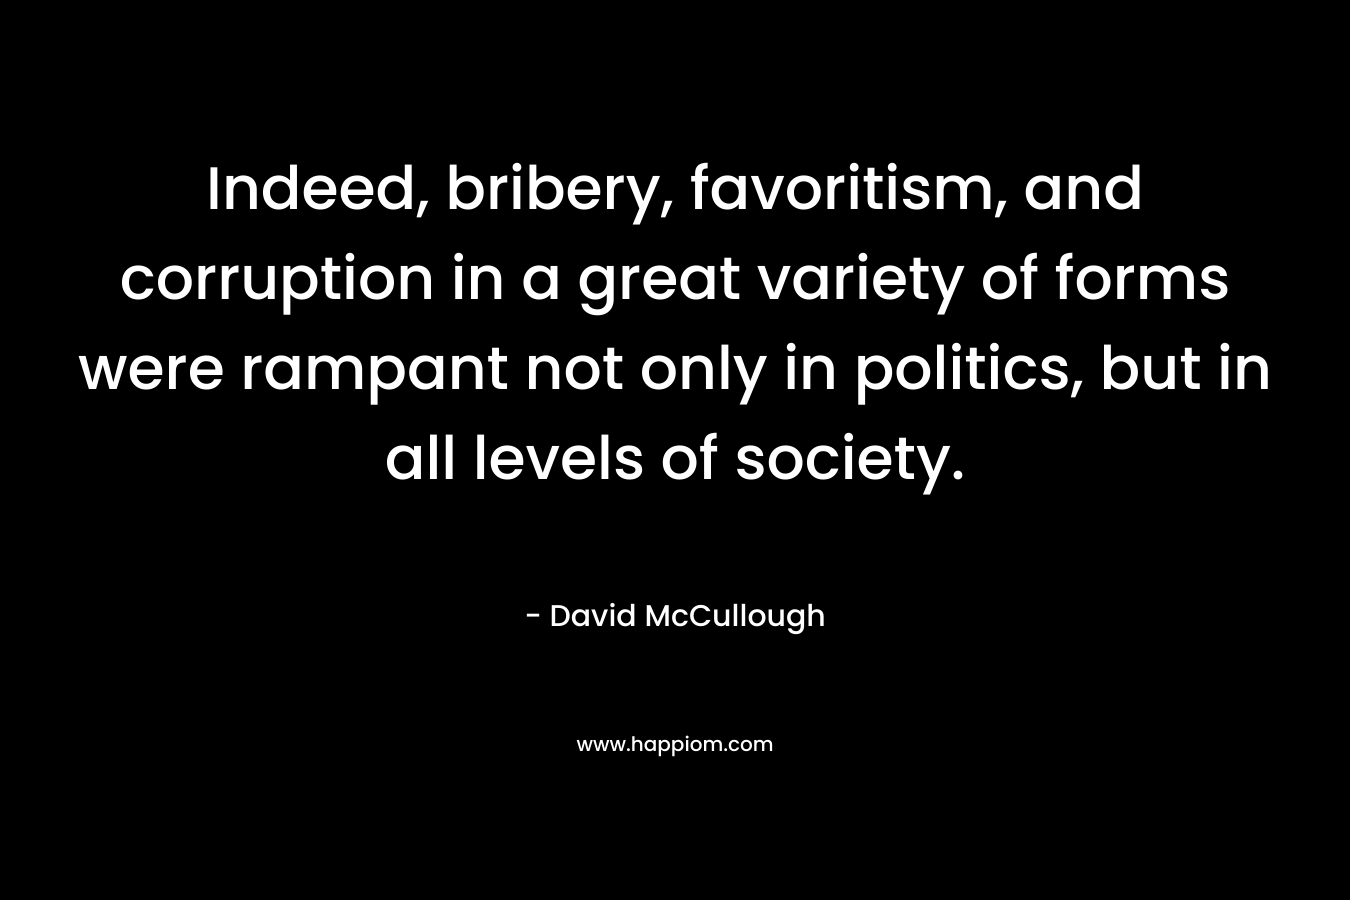 Indeed, bribery, favoritism, and corruption in a great variety of forms were rampant not only in politics, but in all levels of society. – David McCullough